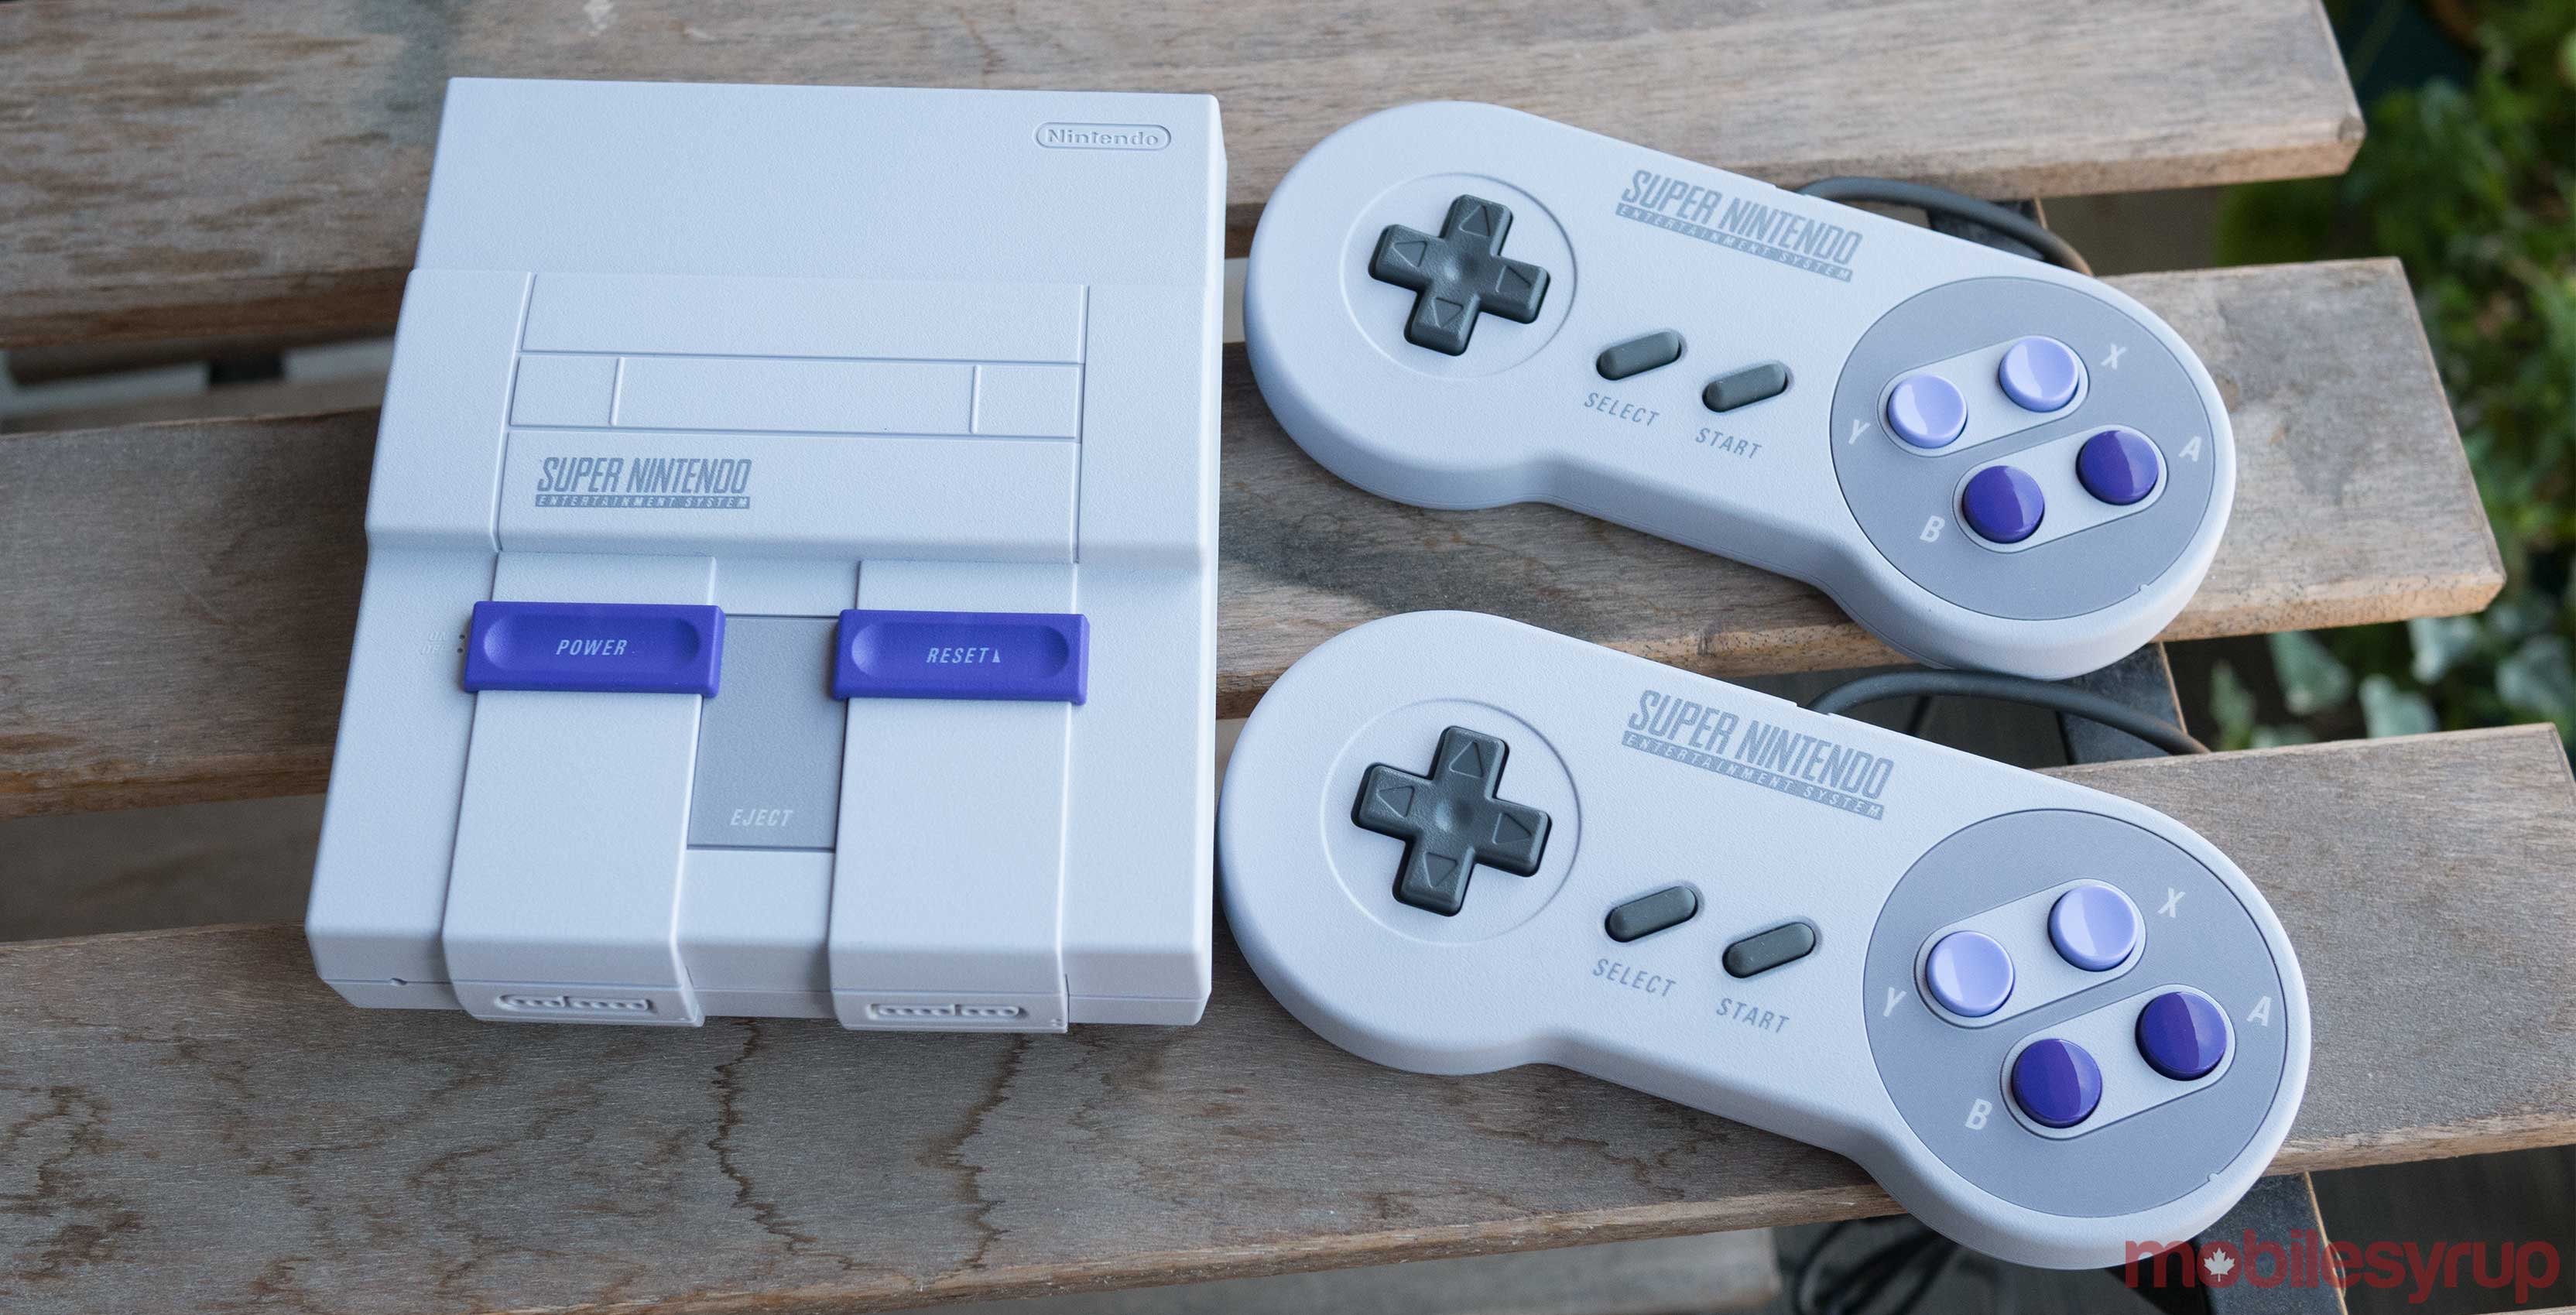 SNES Classic with controllers